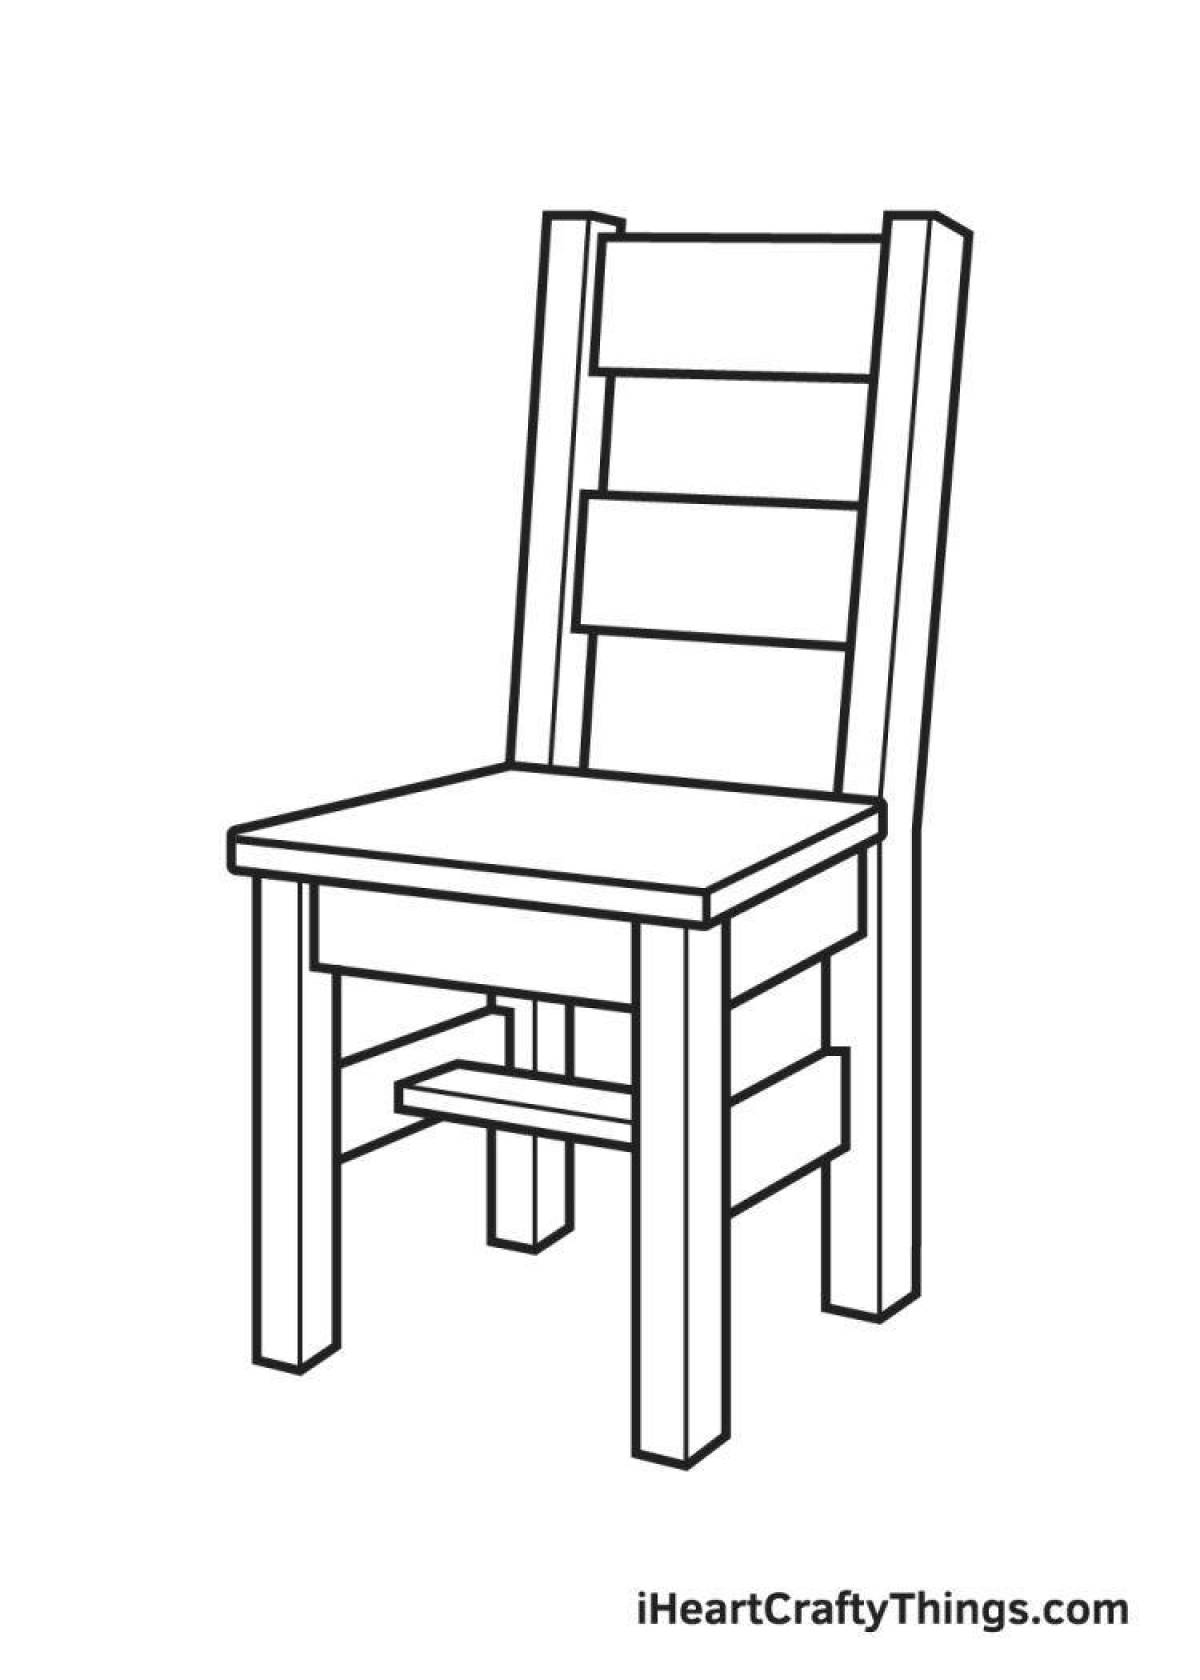 Fun chair coloring for kids